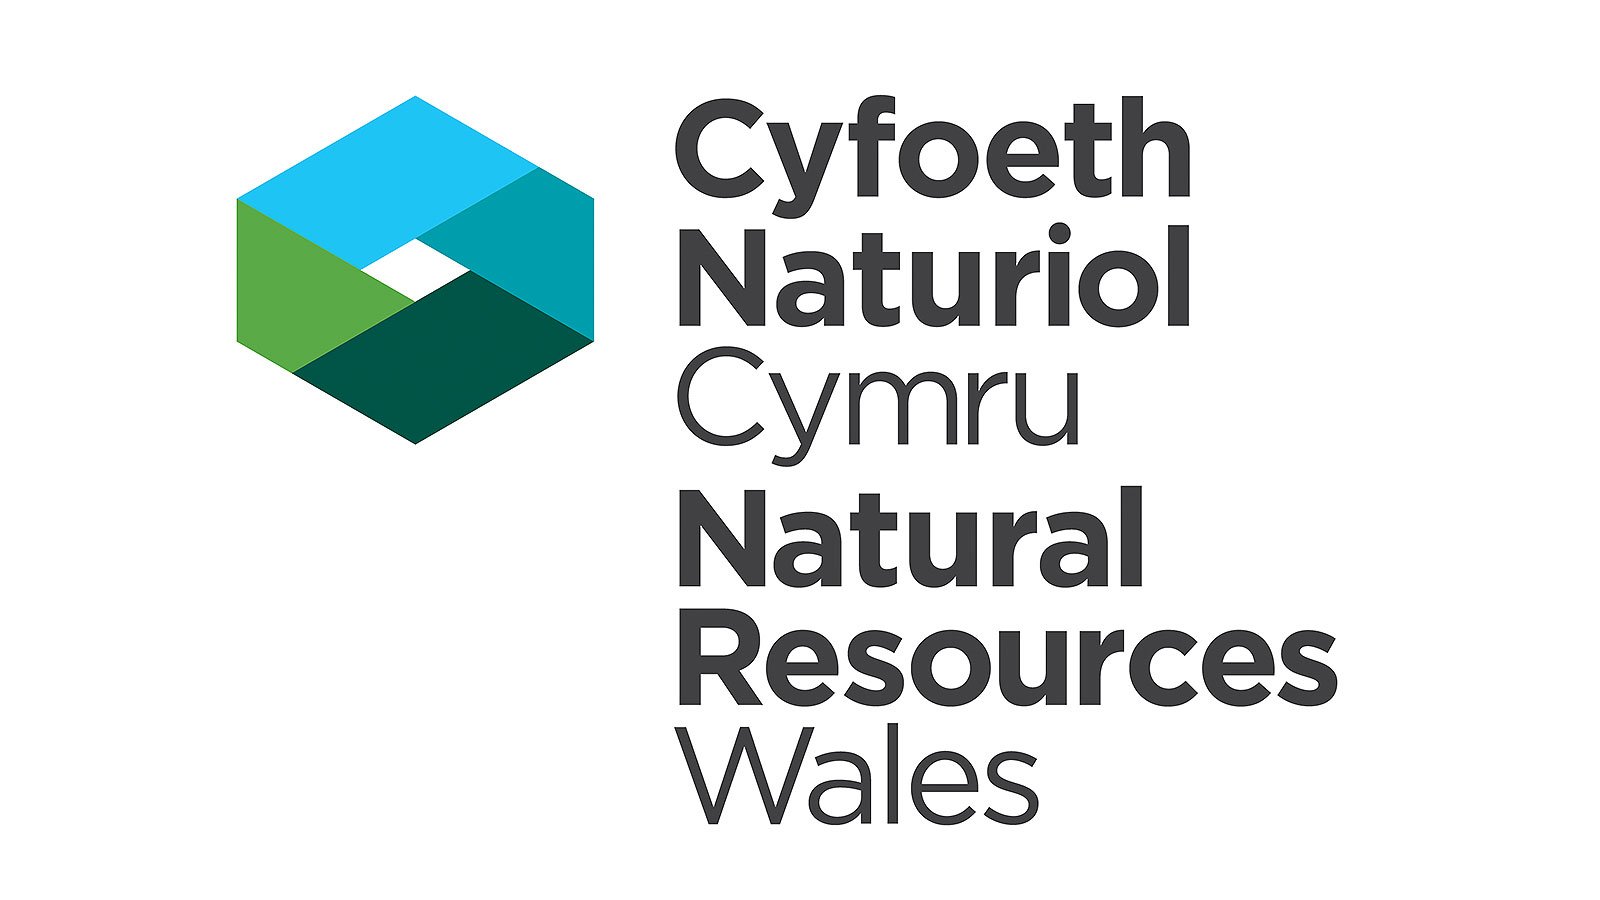 Asite are pleased to announce the arrival of Natural Resources Wales on to the Adoddle Cloud platform